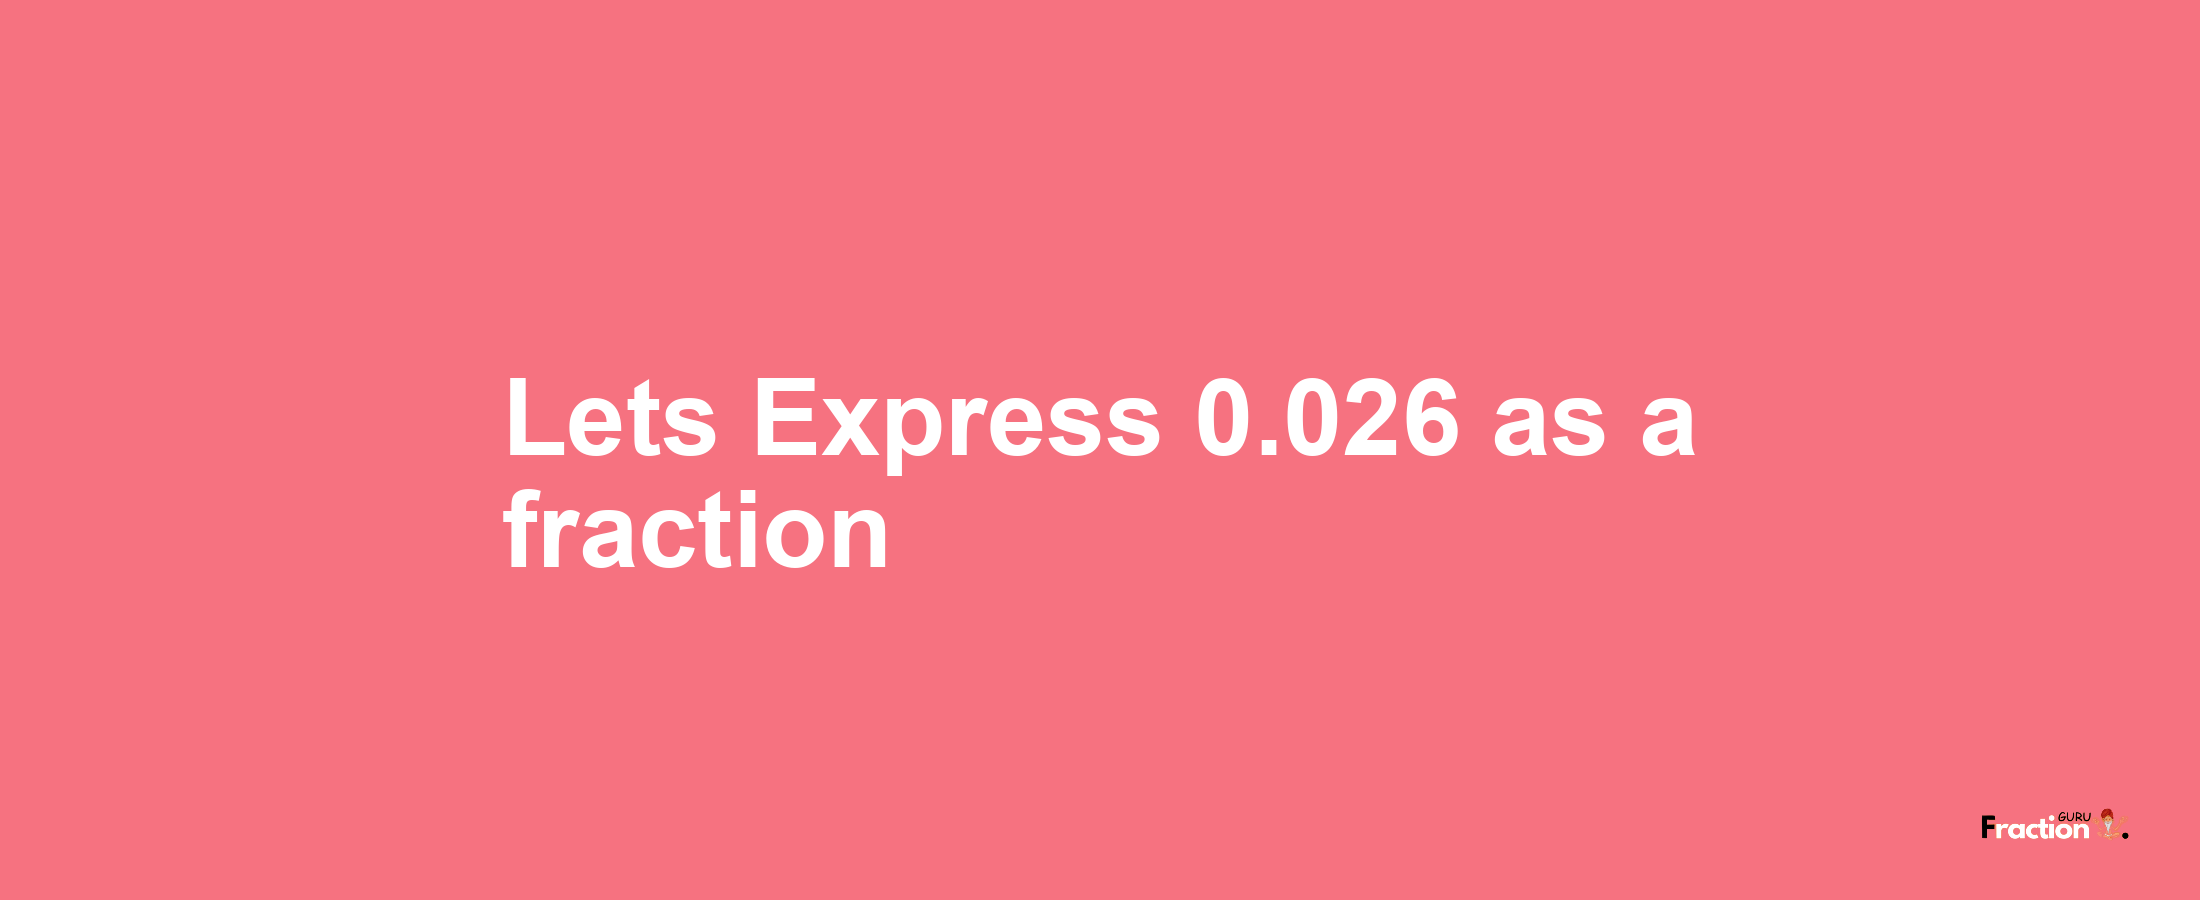 Lets Express 0.026 as afraction